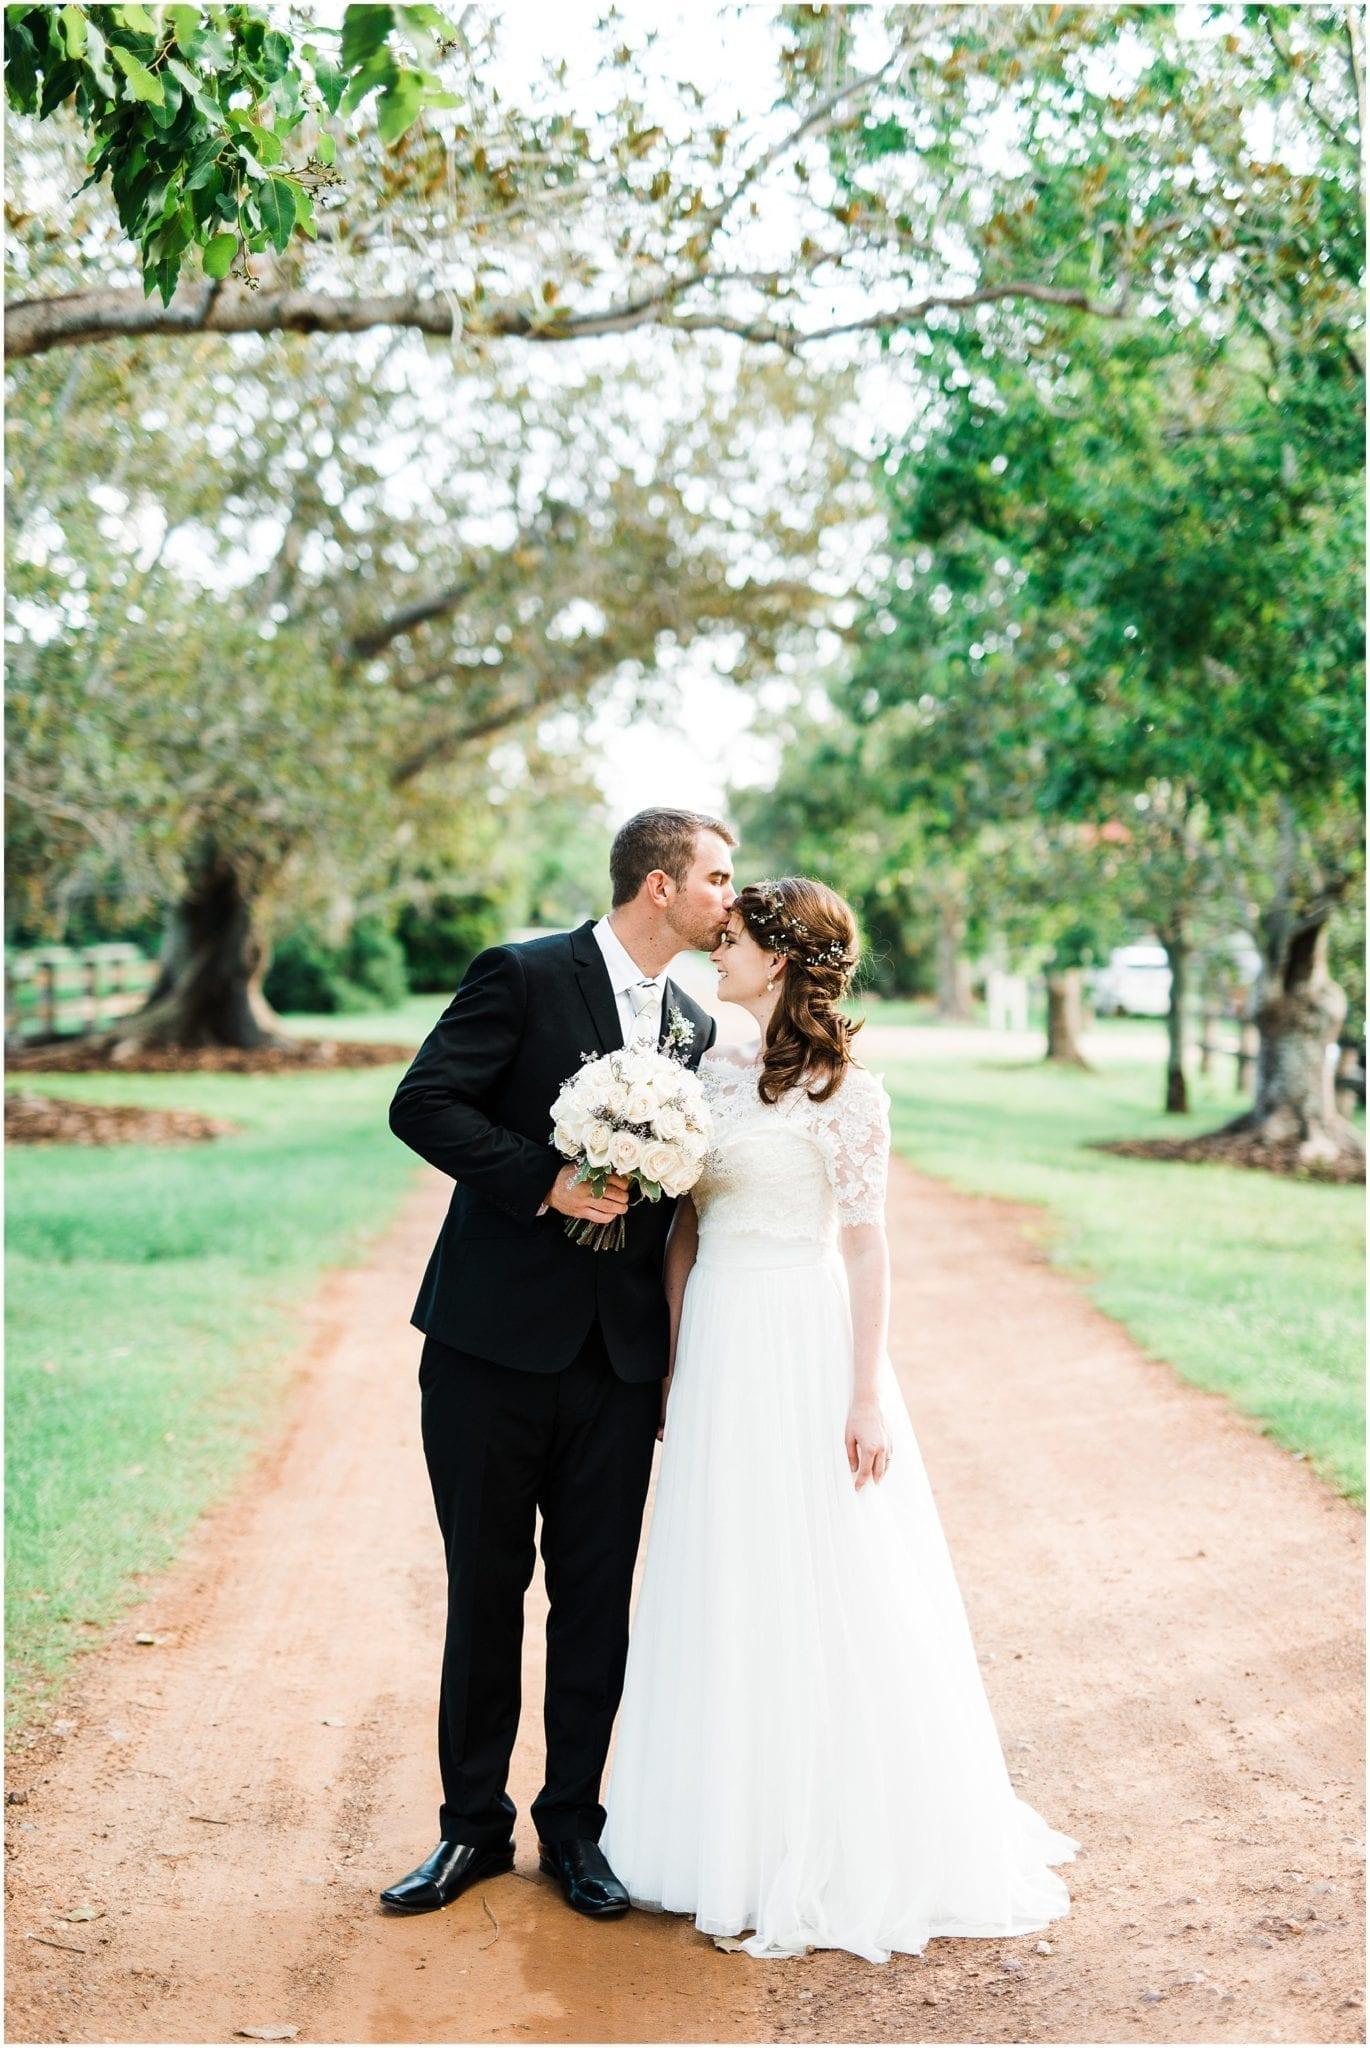 Leah & Lee's Country Romance Wedding - White Lily Couture